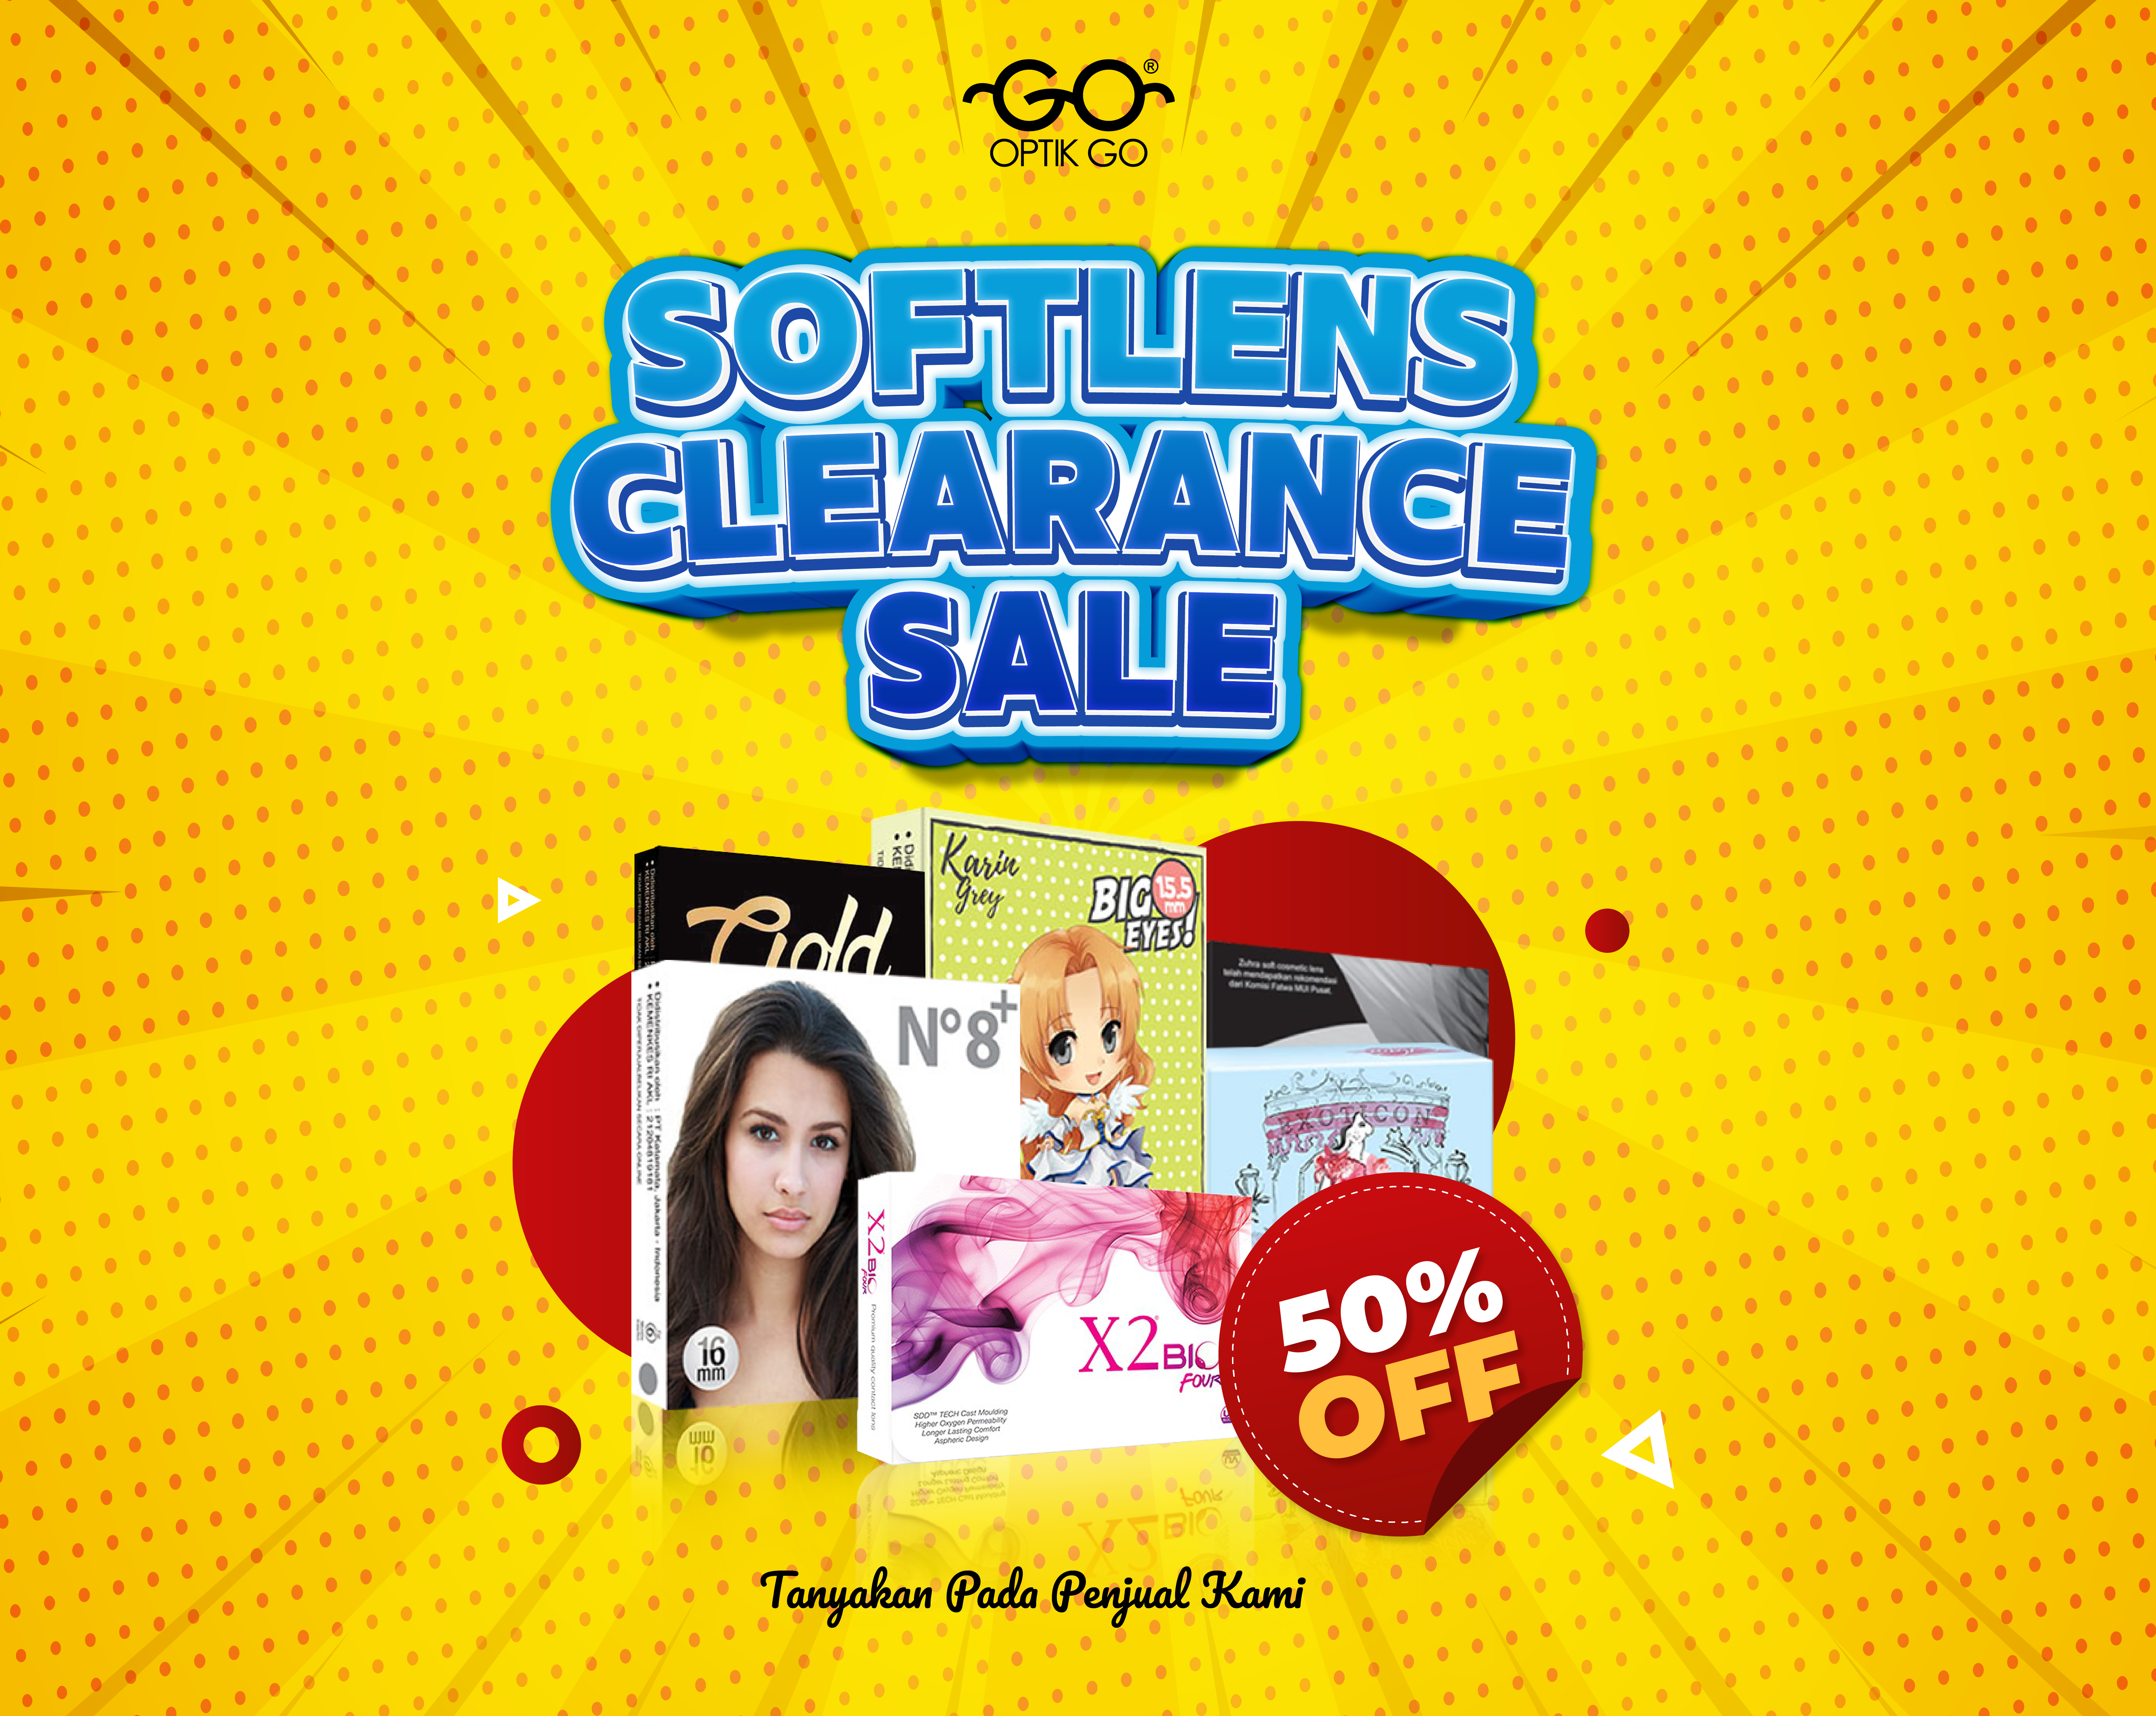 Softlens Clearence Sale